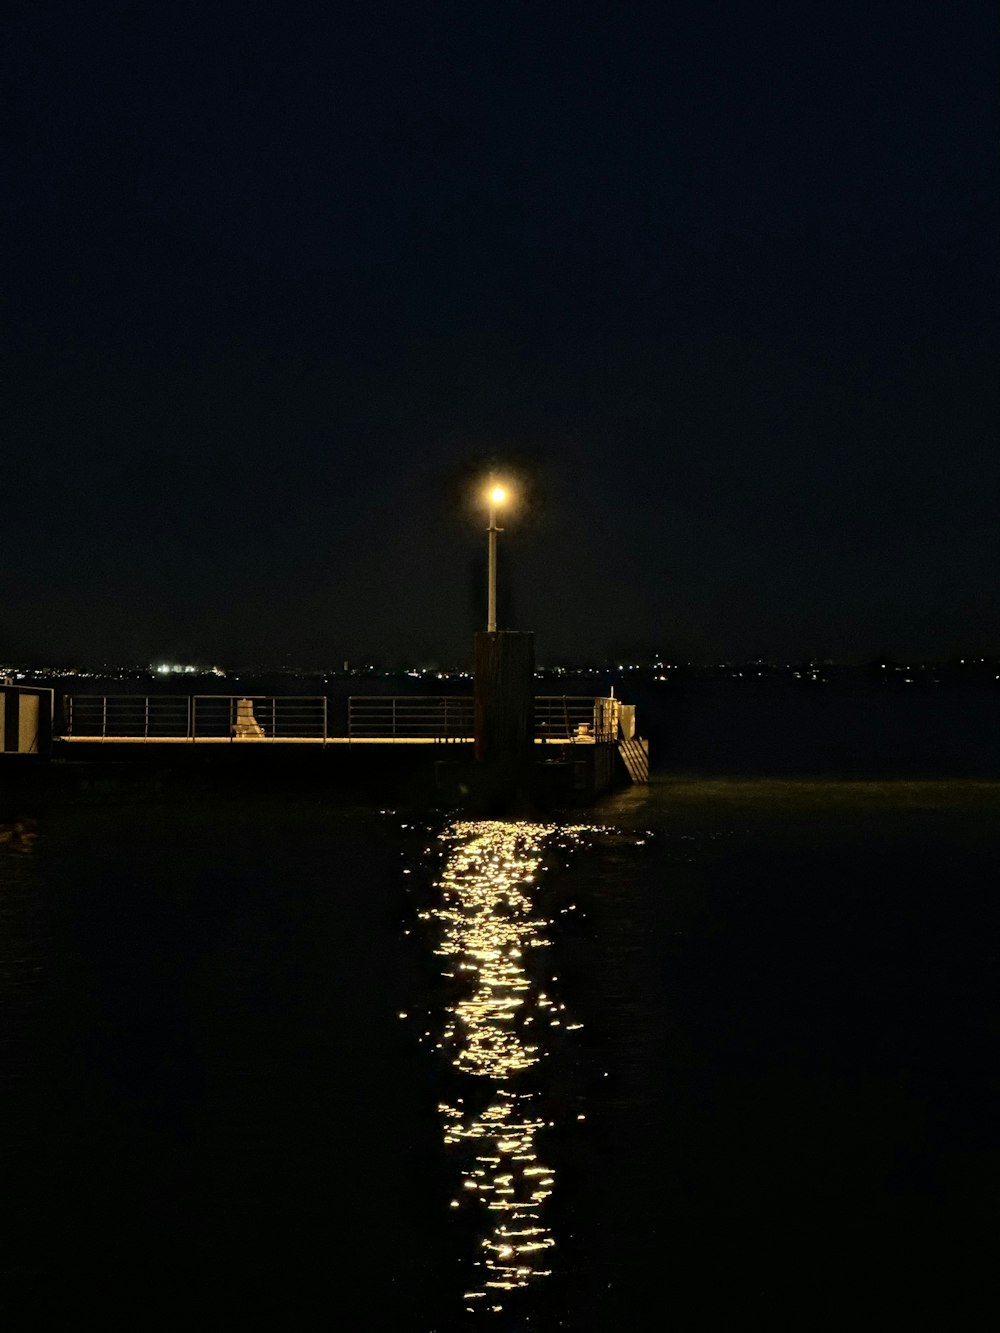 a lighthouse is lit up at night on the water